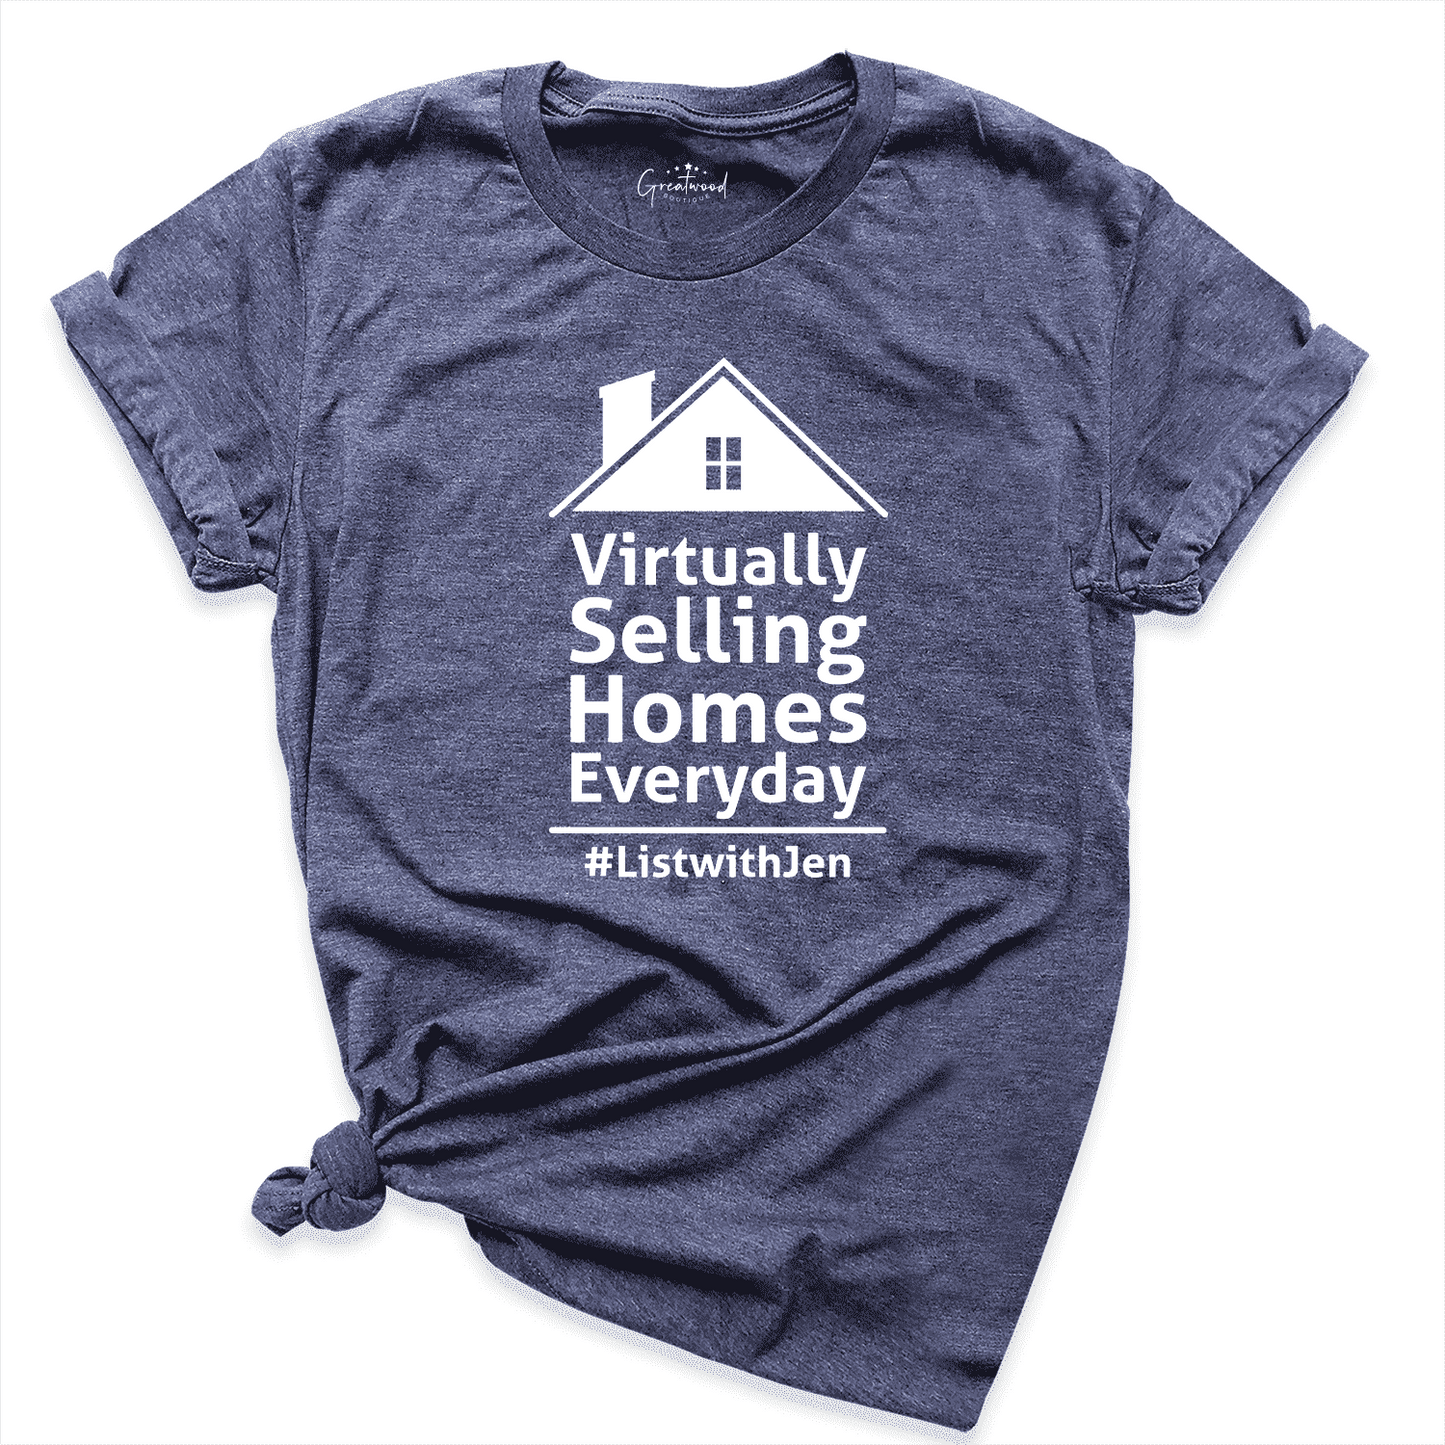 Virtually Selling Homes Everyday Shirt Navy - Greatwood Boutique